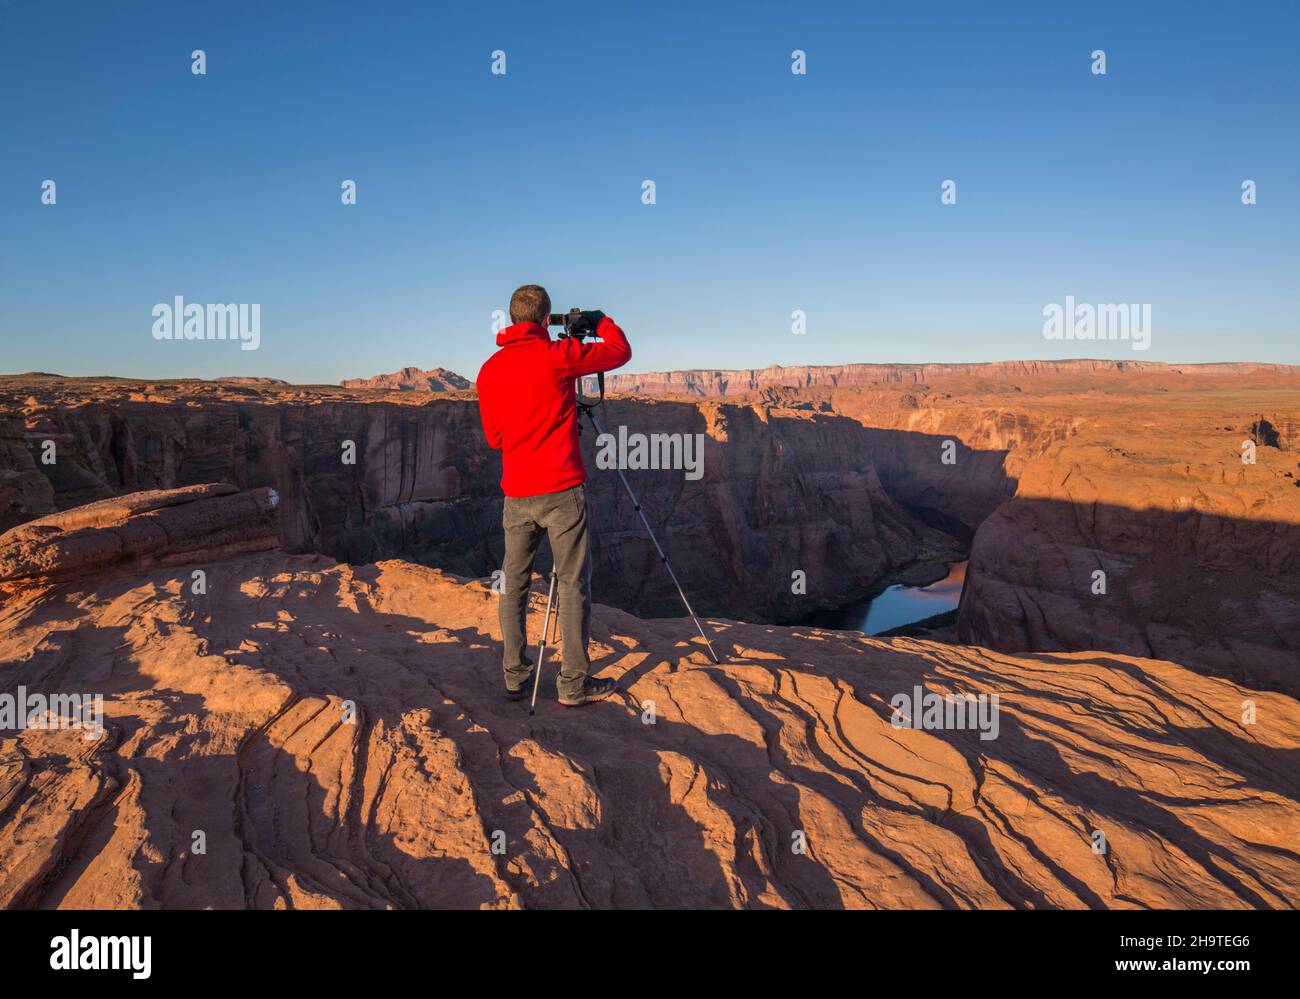 Glen Canyon National Recreation Area, Page, Arizona, USA. Photographer at cliff edge shooting view over the Colorado River at Horseshoe Bend, sunrise. Stock Photo